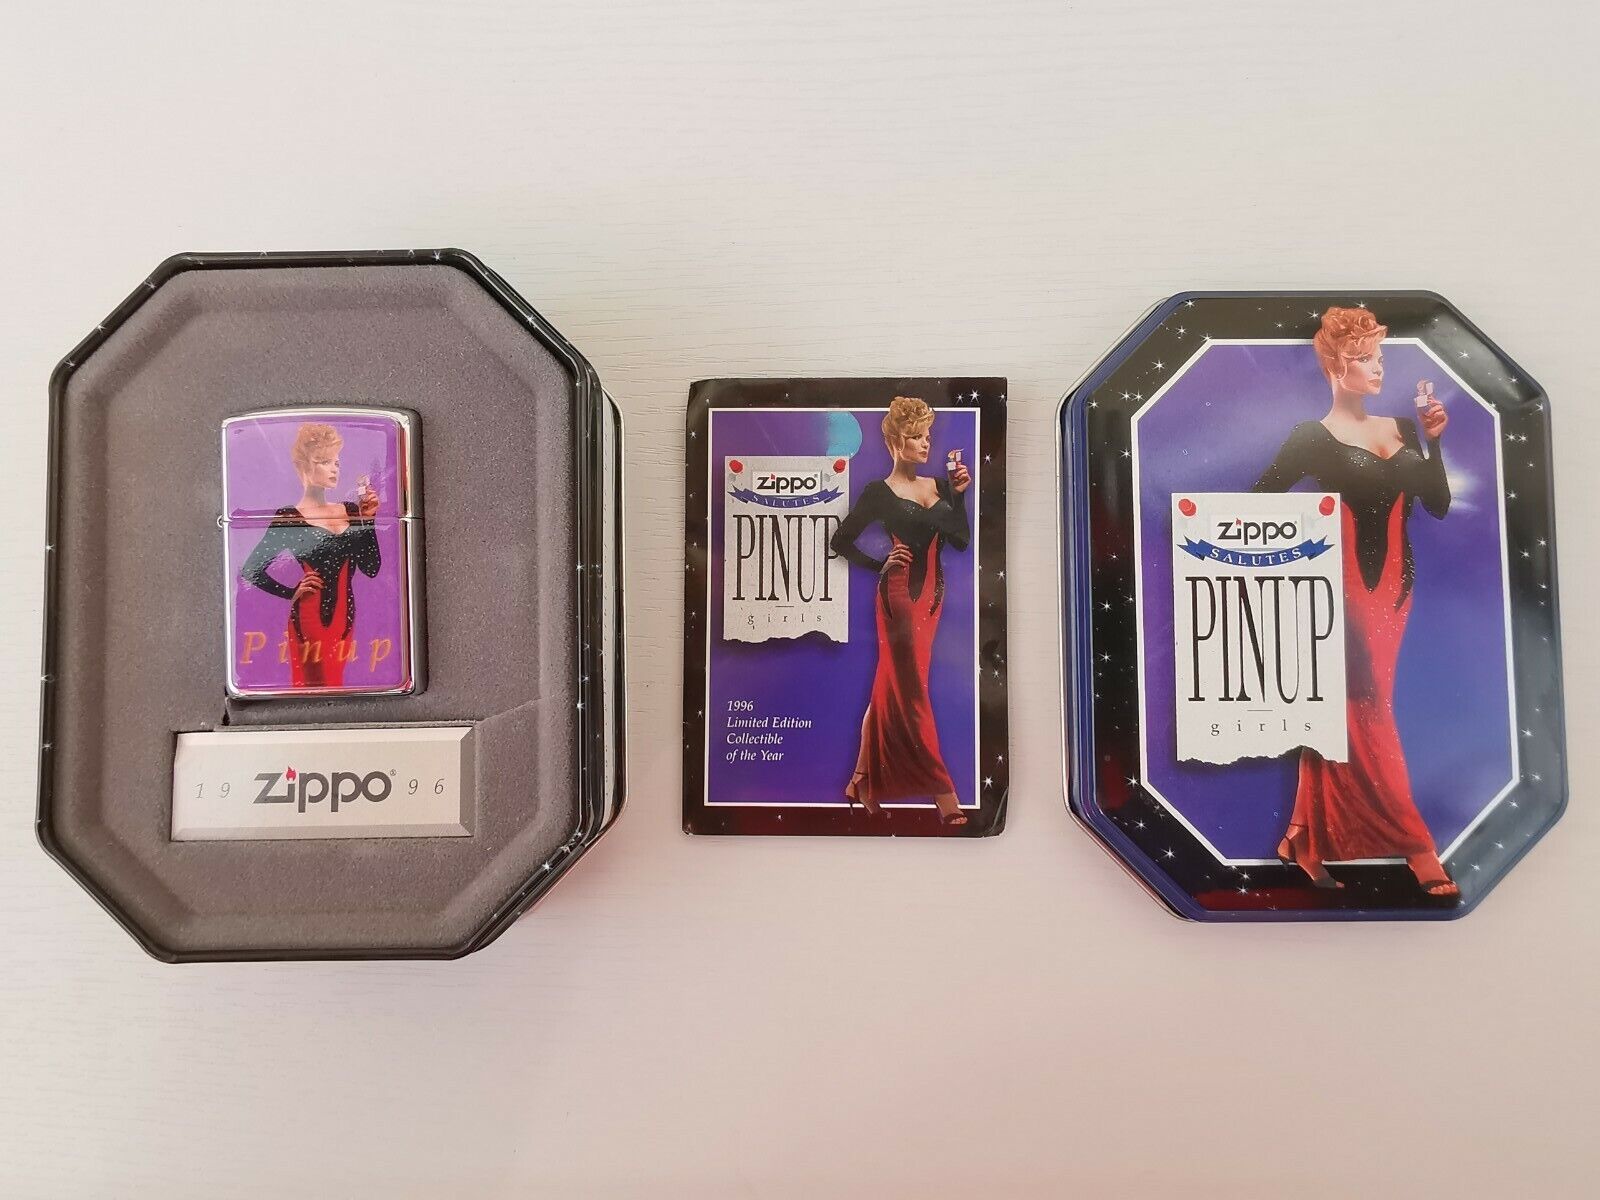 Zippo Pinup Girls 1996 Limited Edition Tin Collectable Lighter Rare - BNIB